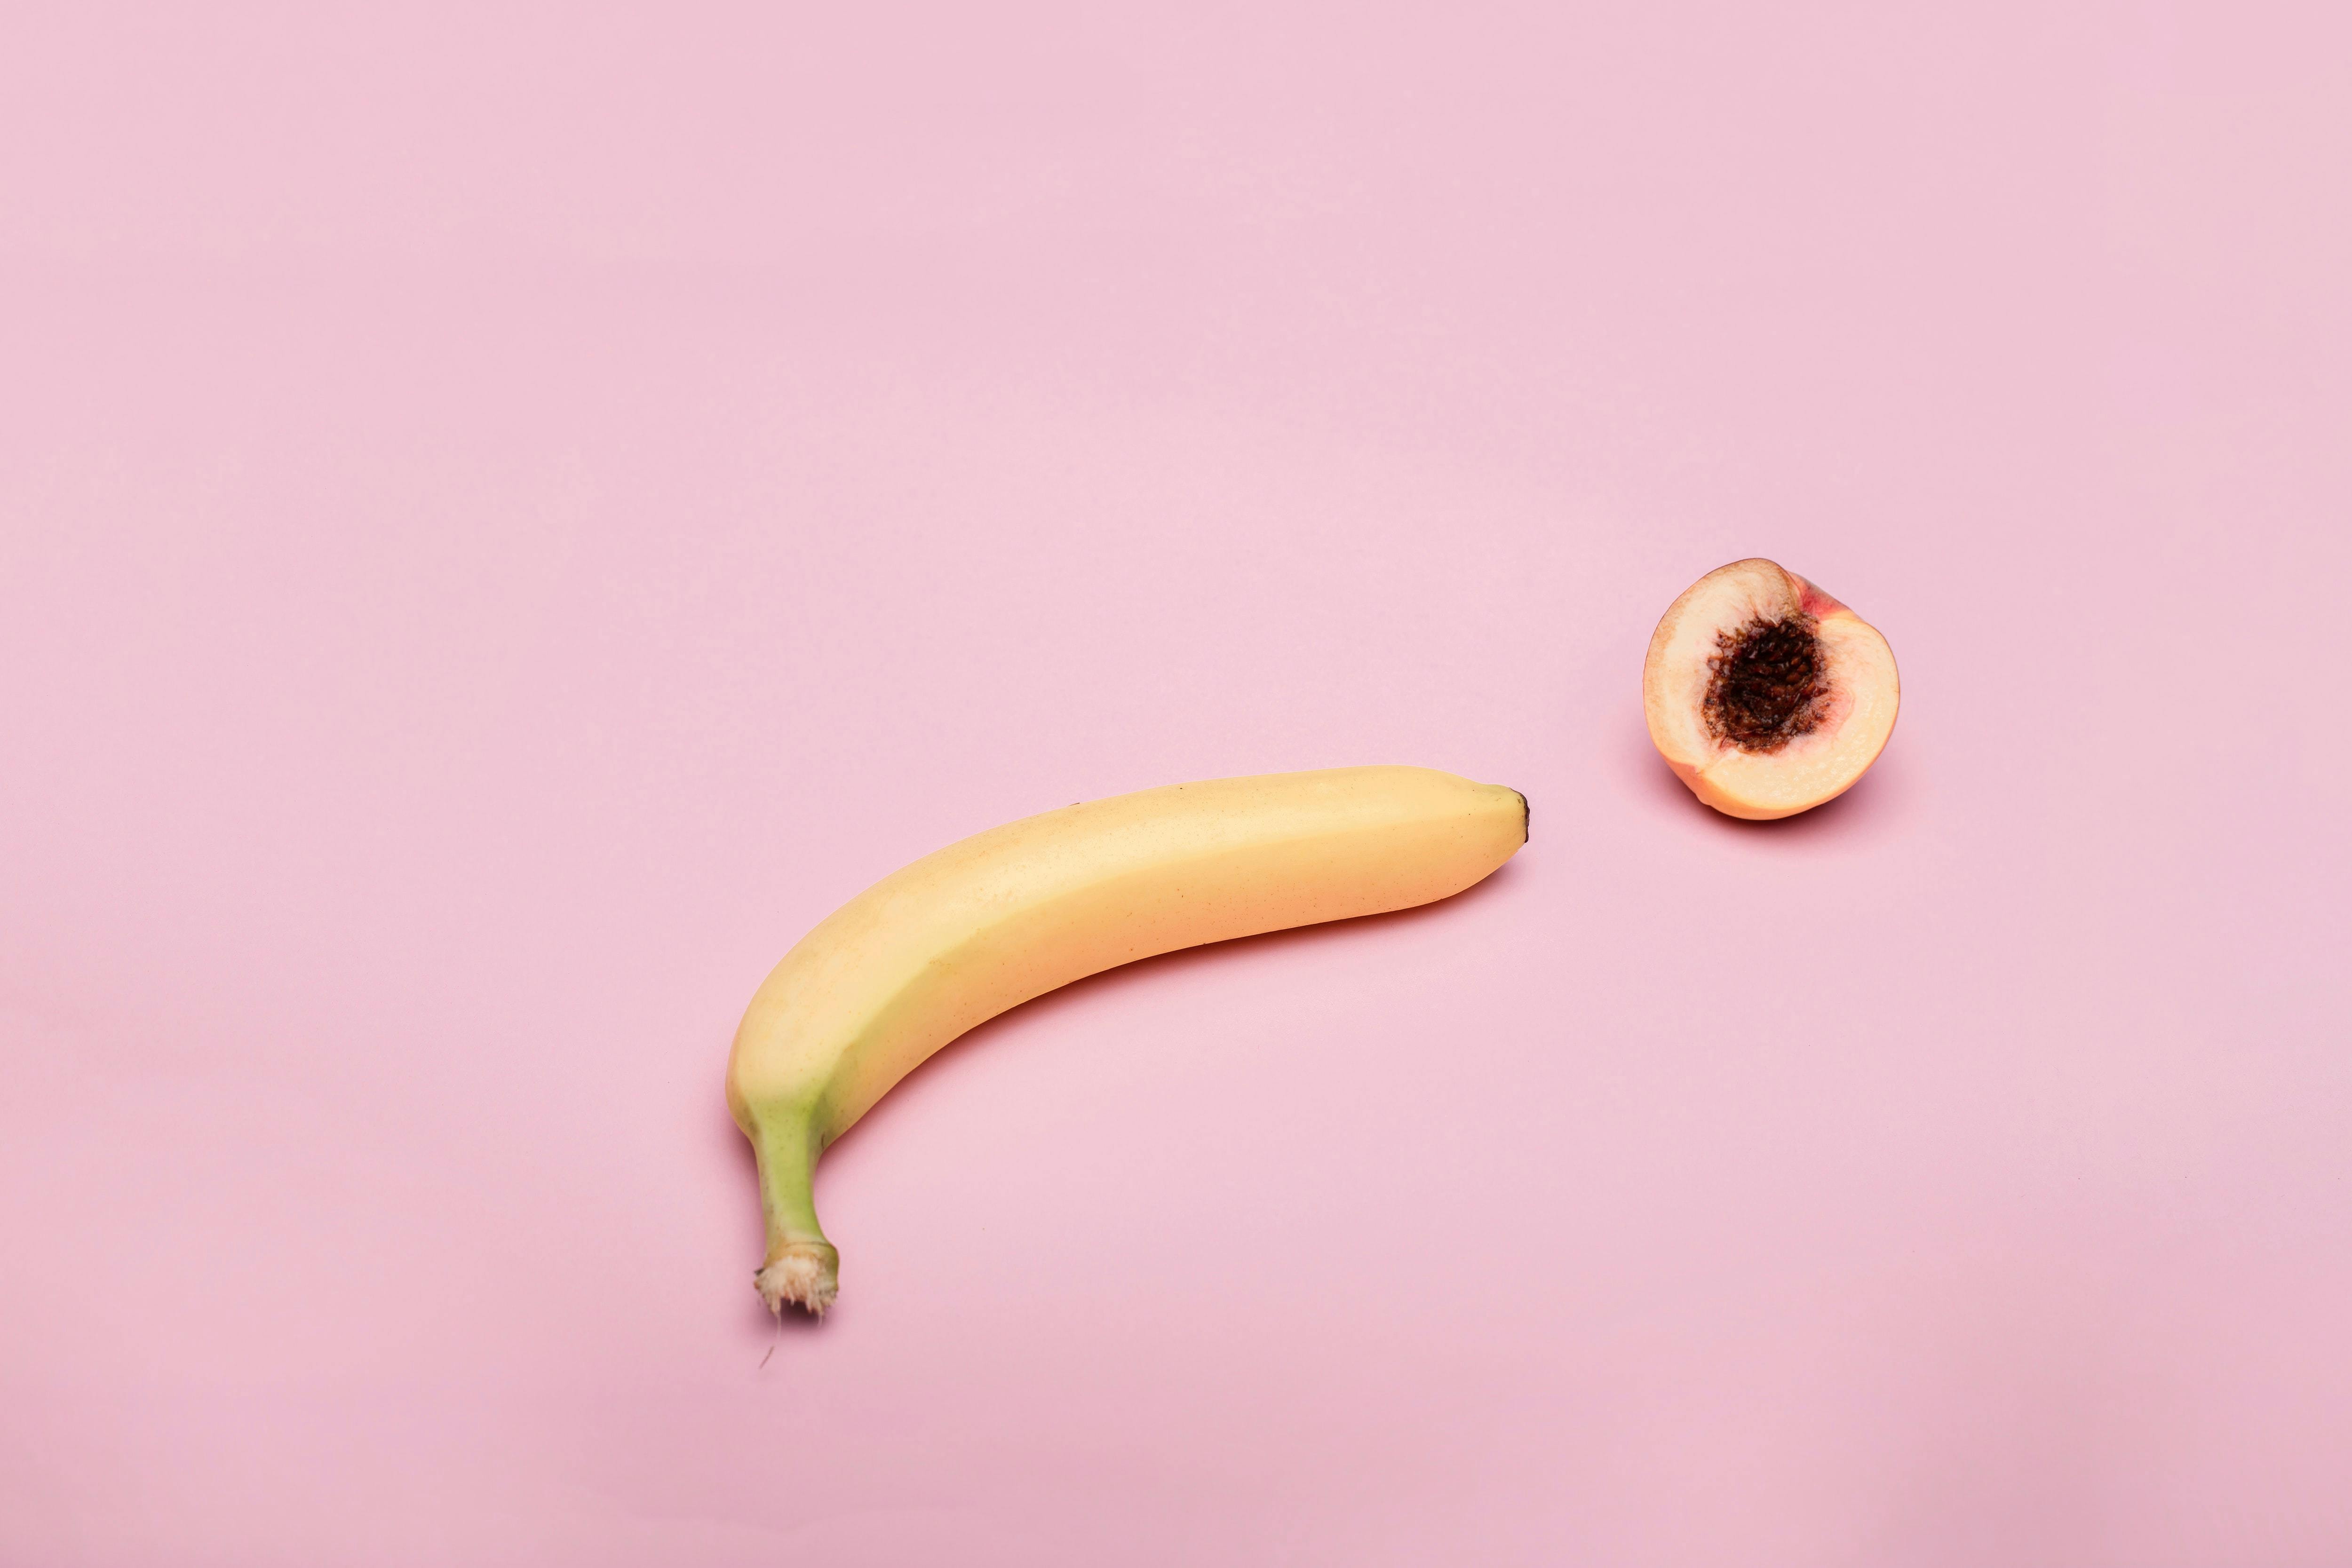 Testosterone and libido — banana and peach on pink background